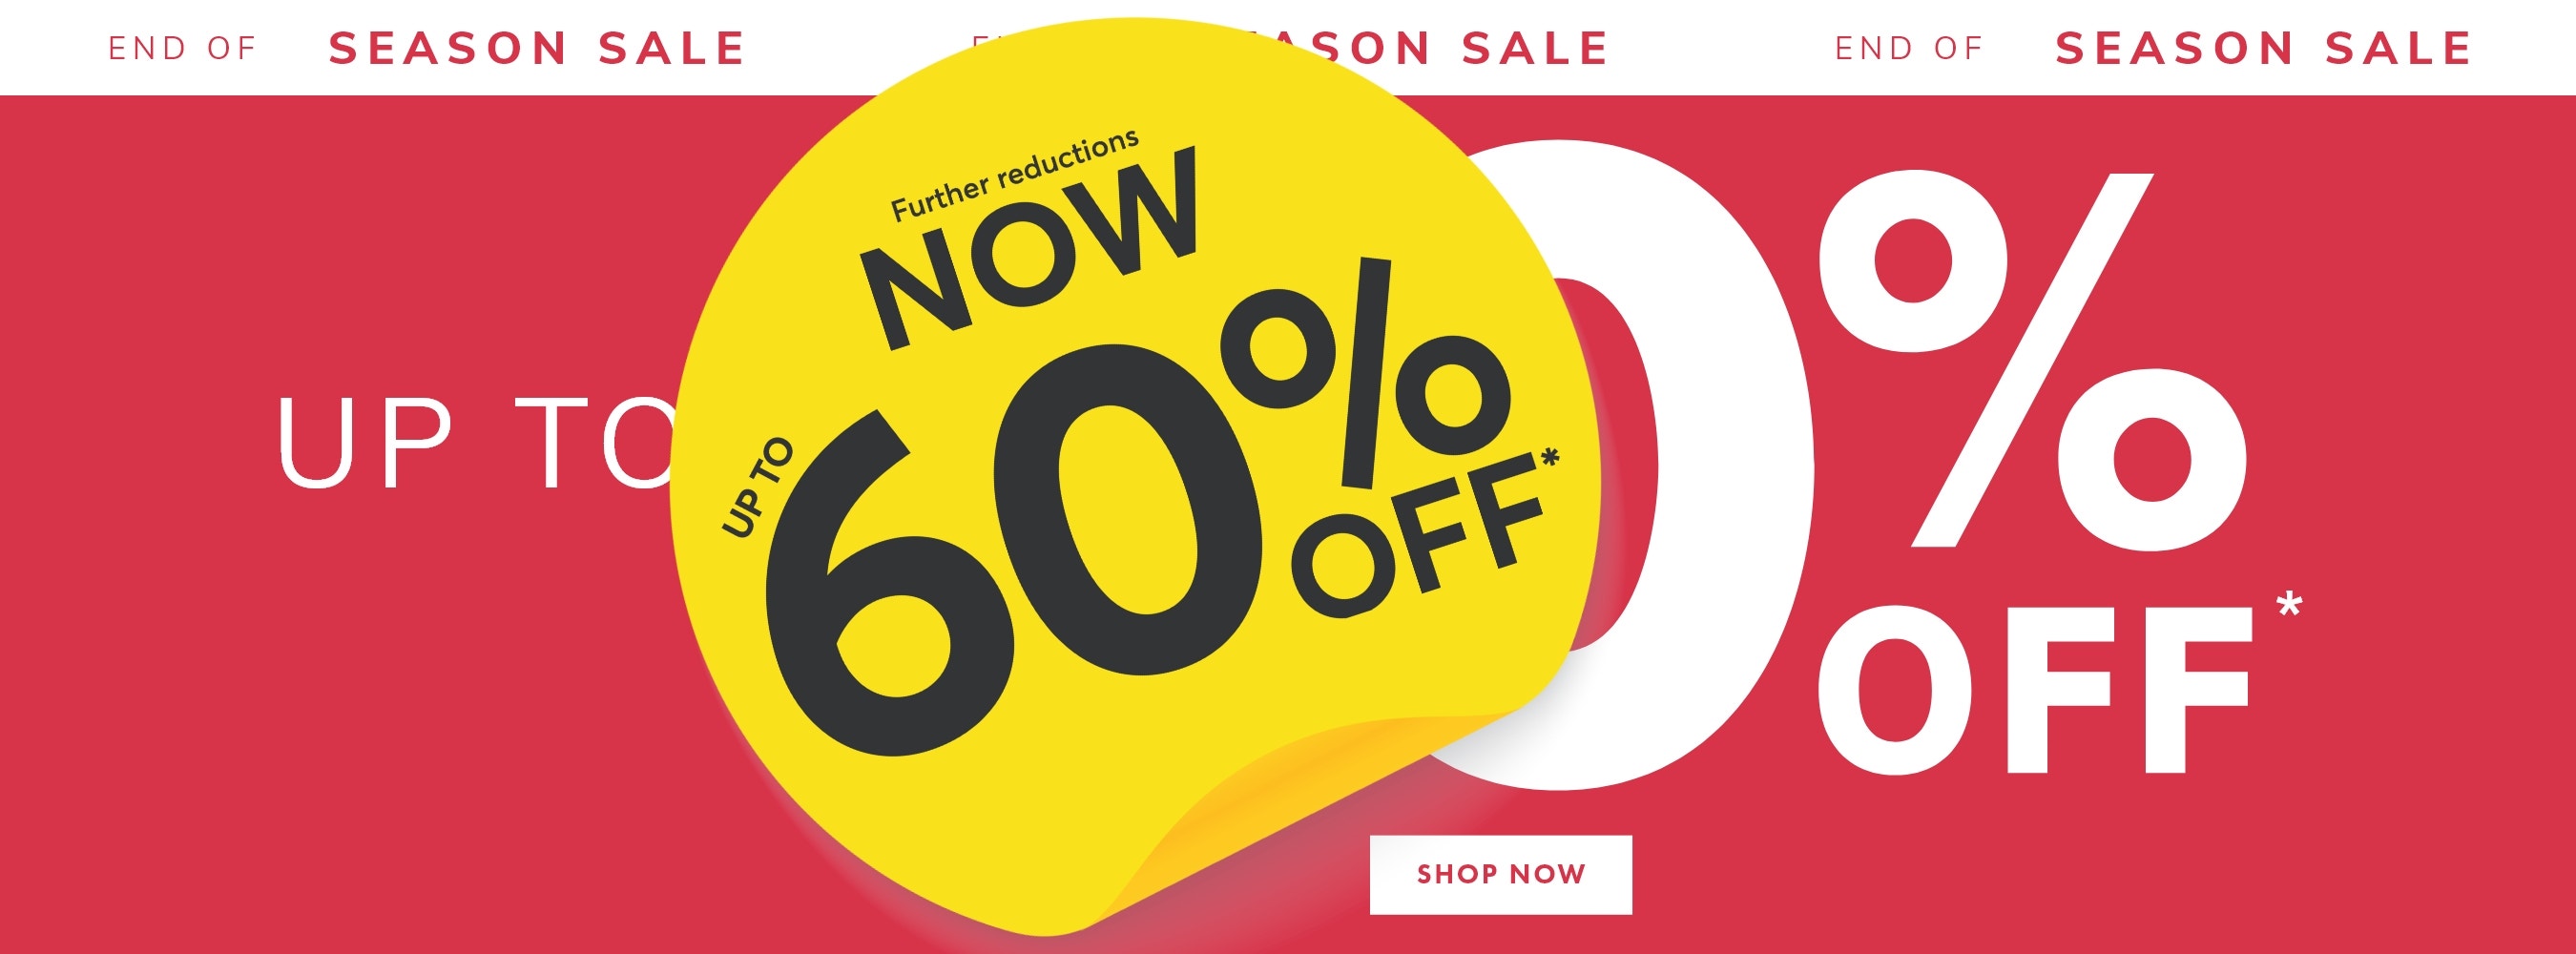 Up to 60% OFF deals on selected styles at Bendon Lingerie